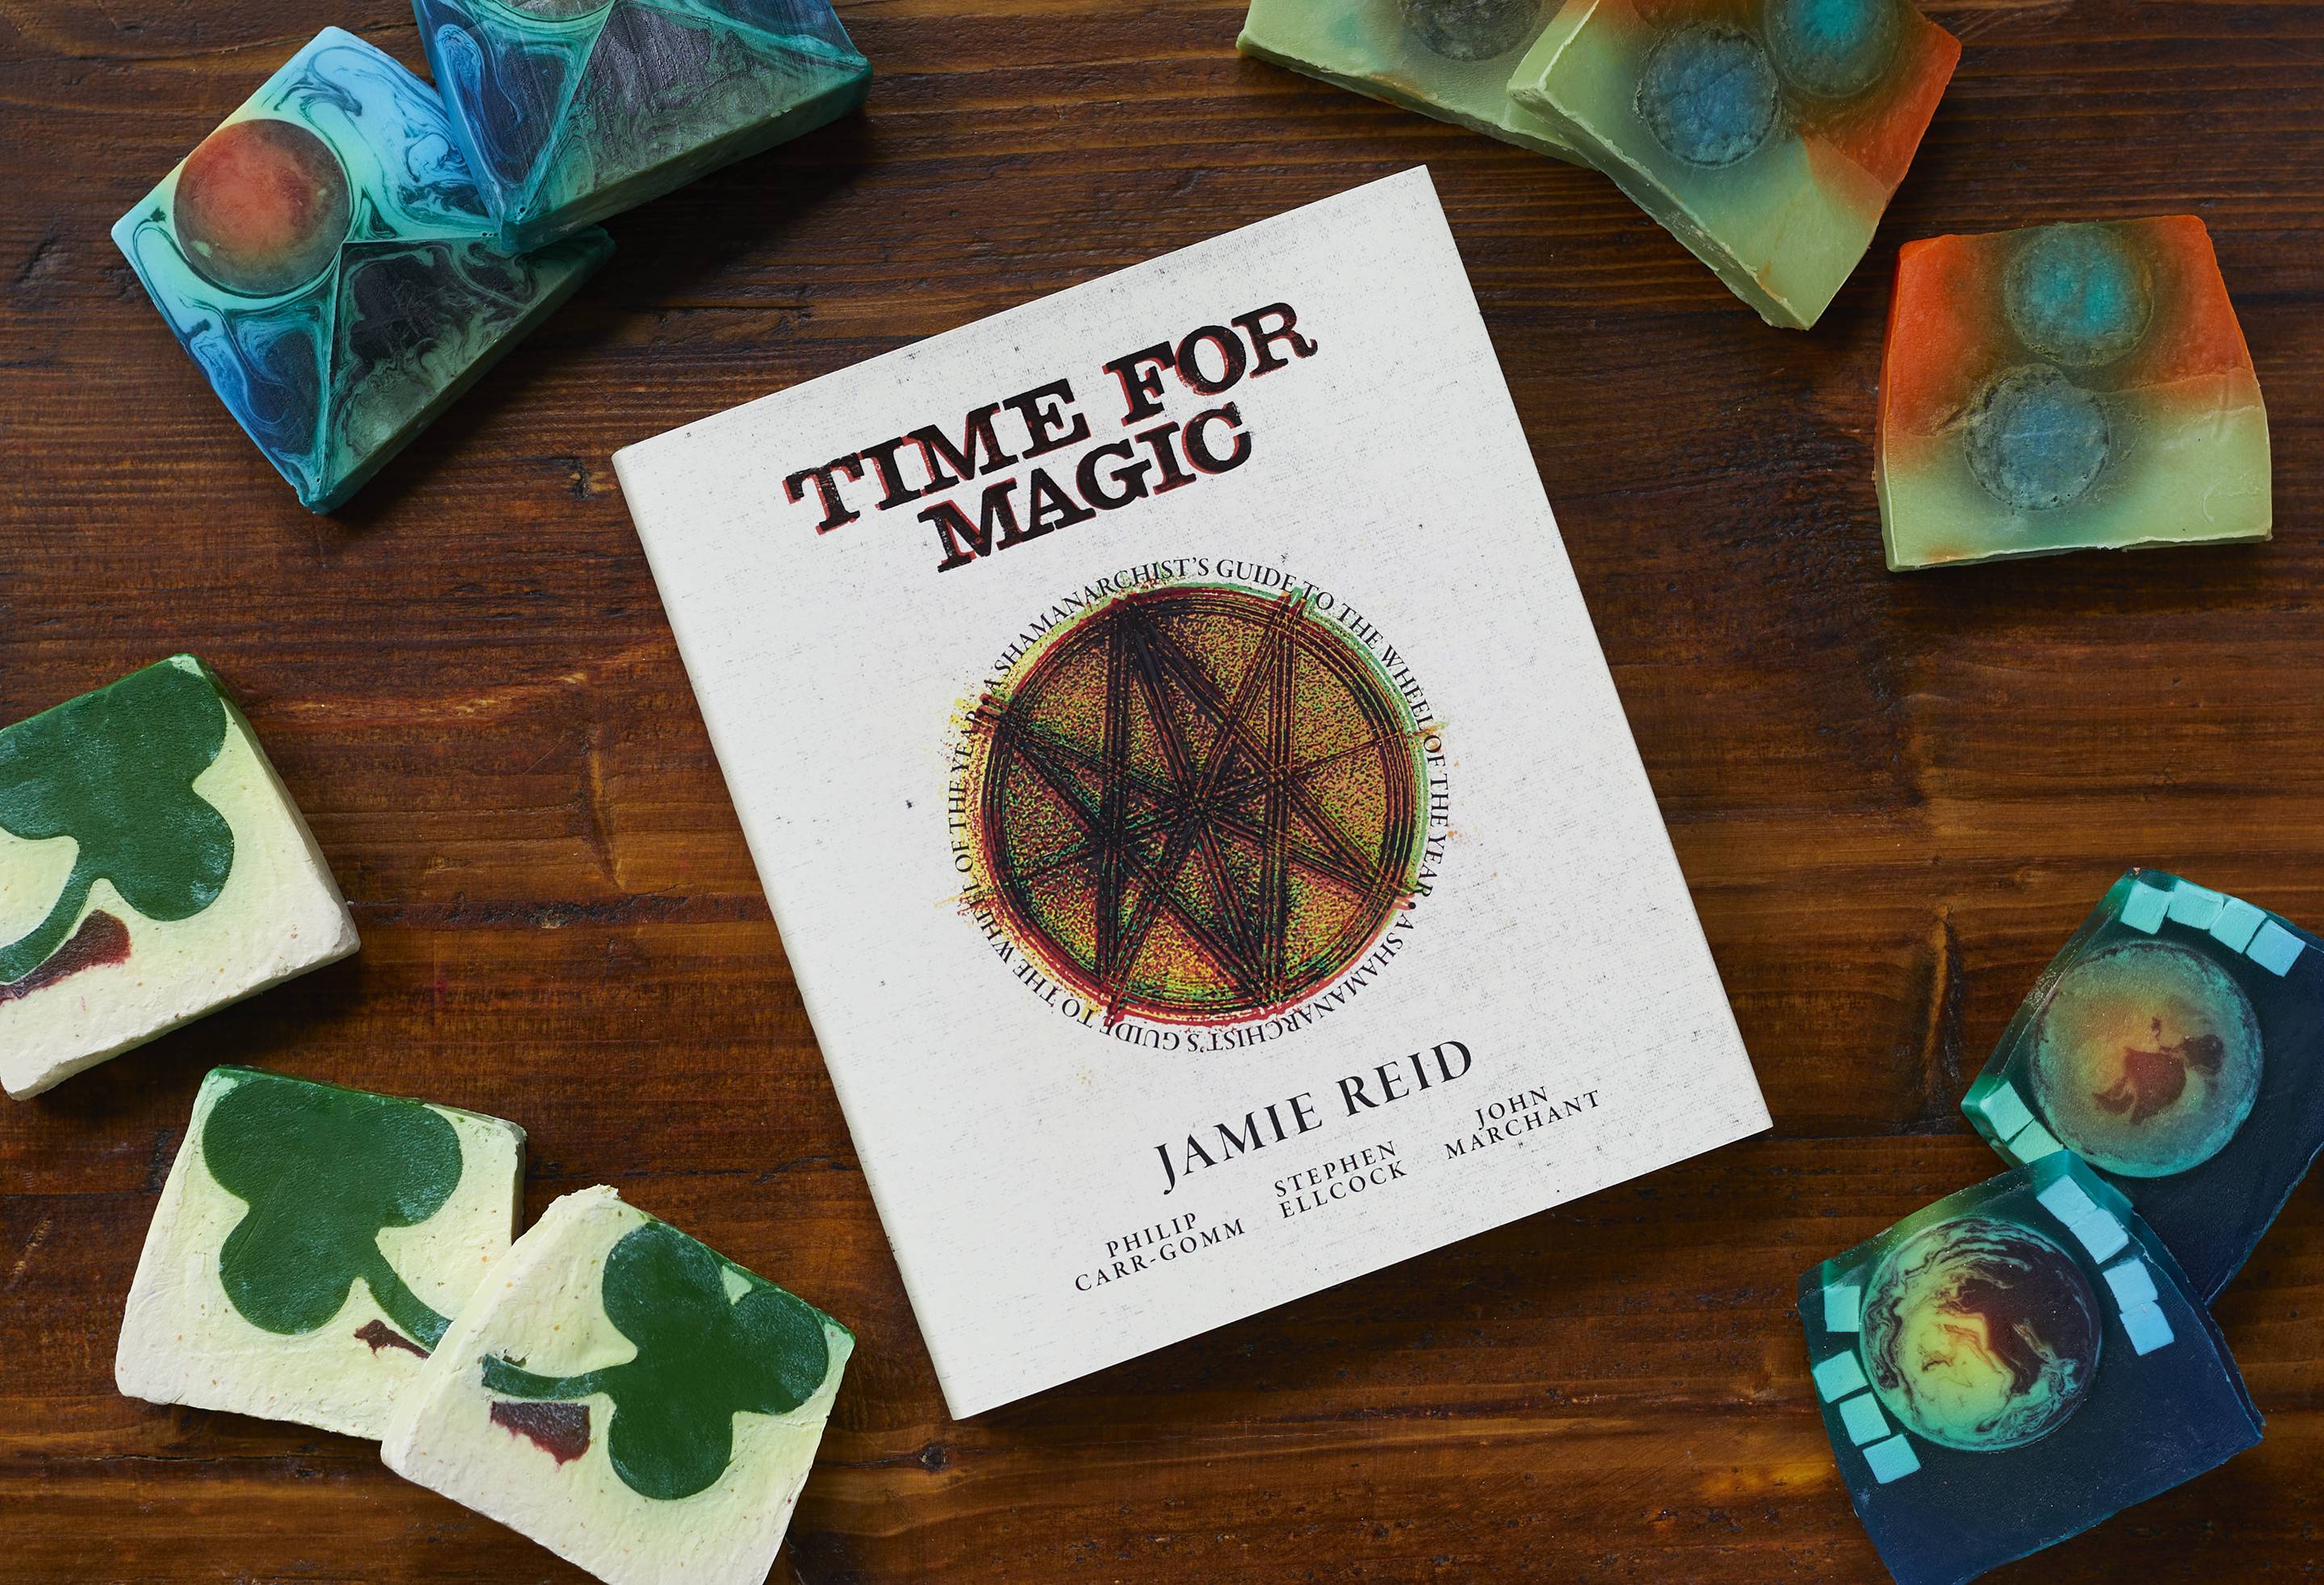 The book "Time For Magic" by Jaime Reid is laid flat on a wooden table surrounded by multiple slices of the four different soap slices designed for Lush with the inspiration of Jaime Reid's art. 